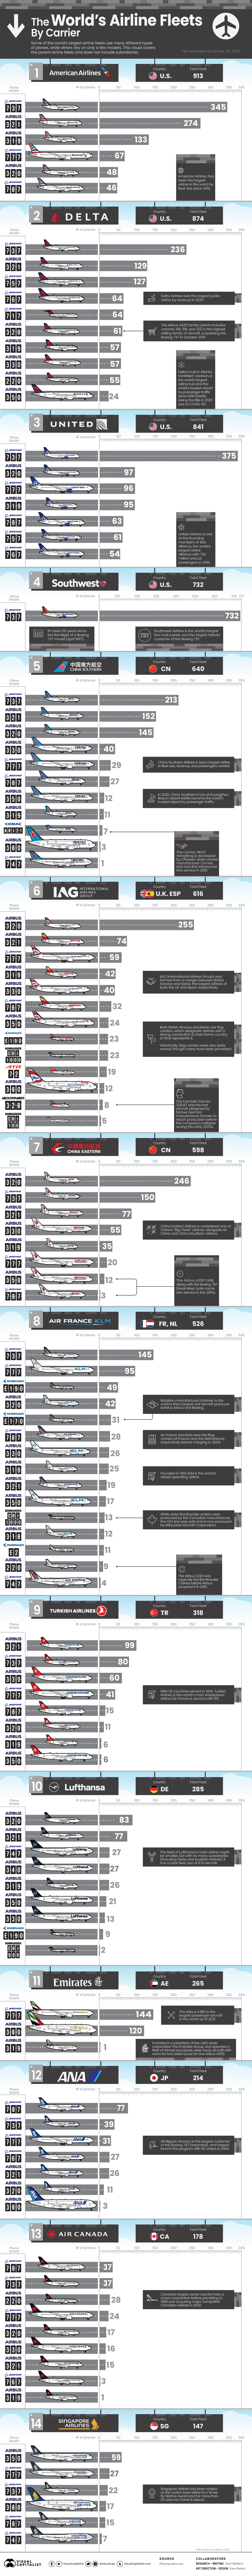 infographic tallies the type of aircraft in airline fleets of major carriers